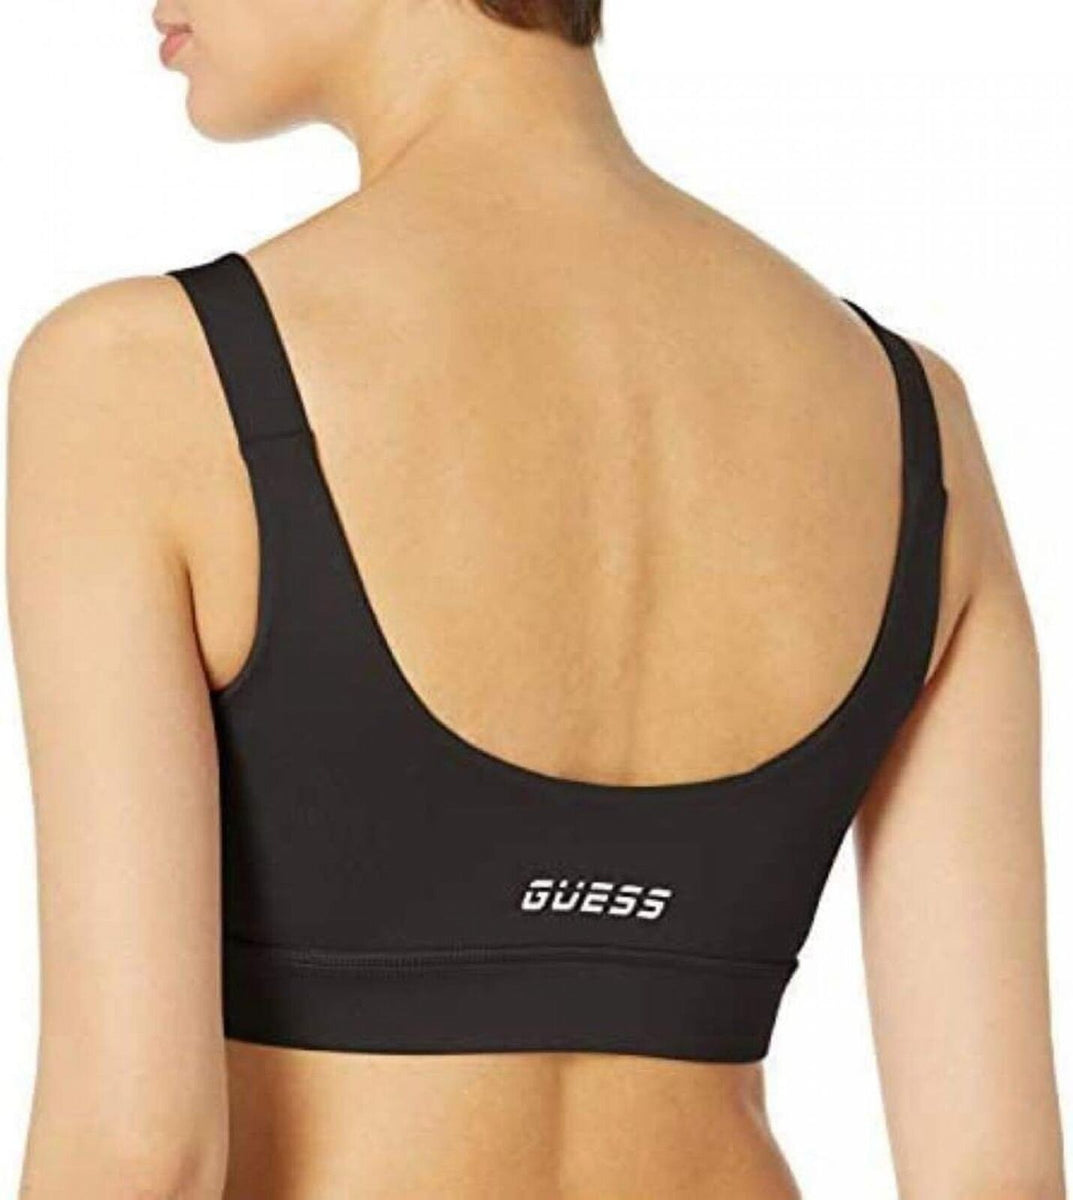 GUESS Women's Active Medium Support Sports Bra with Lace-Up Detail